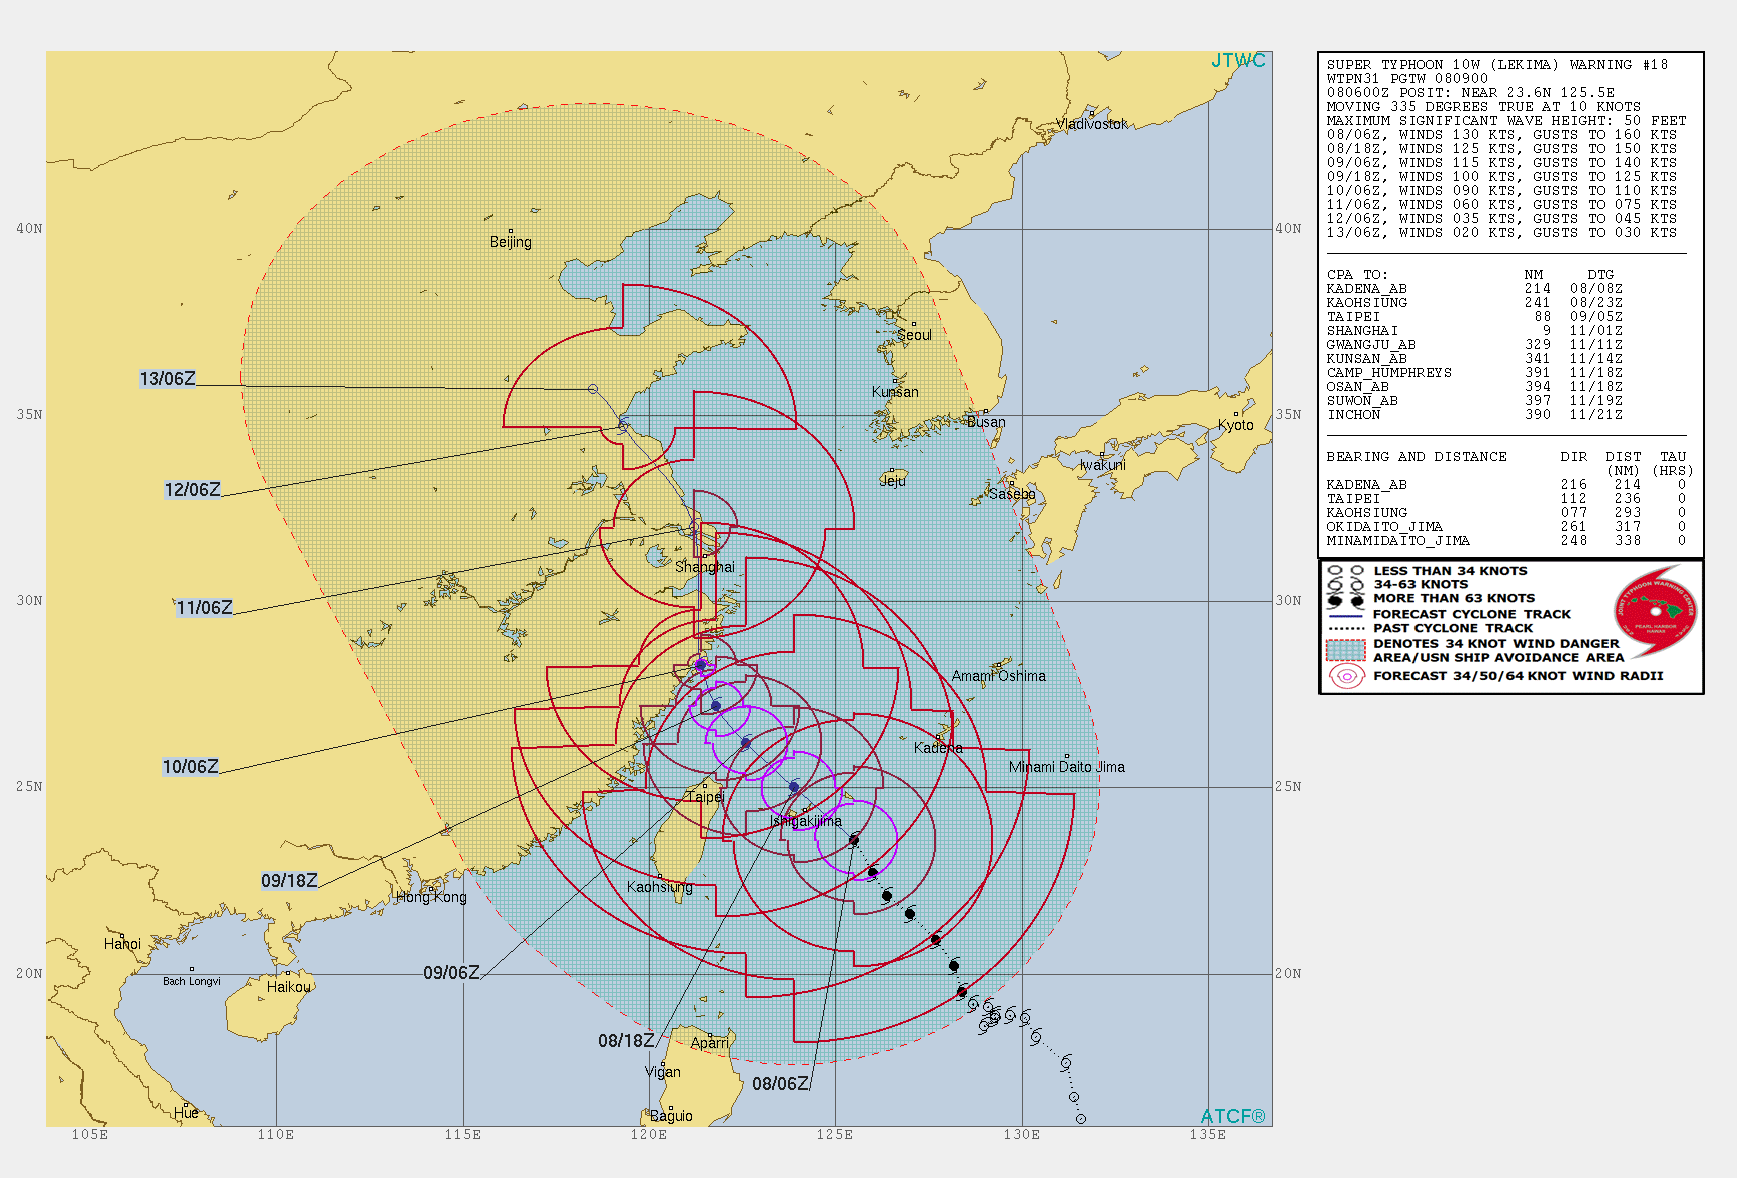 10W MAY TRACK CLOSE TO SHANGHAI IN APPROX 72H